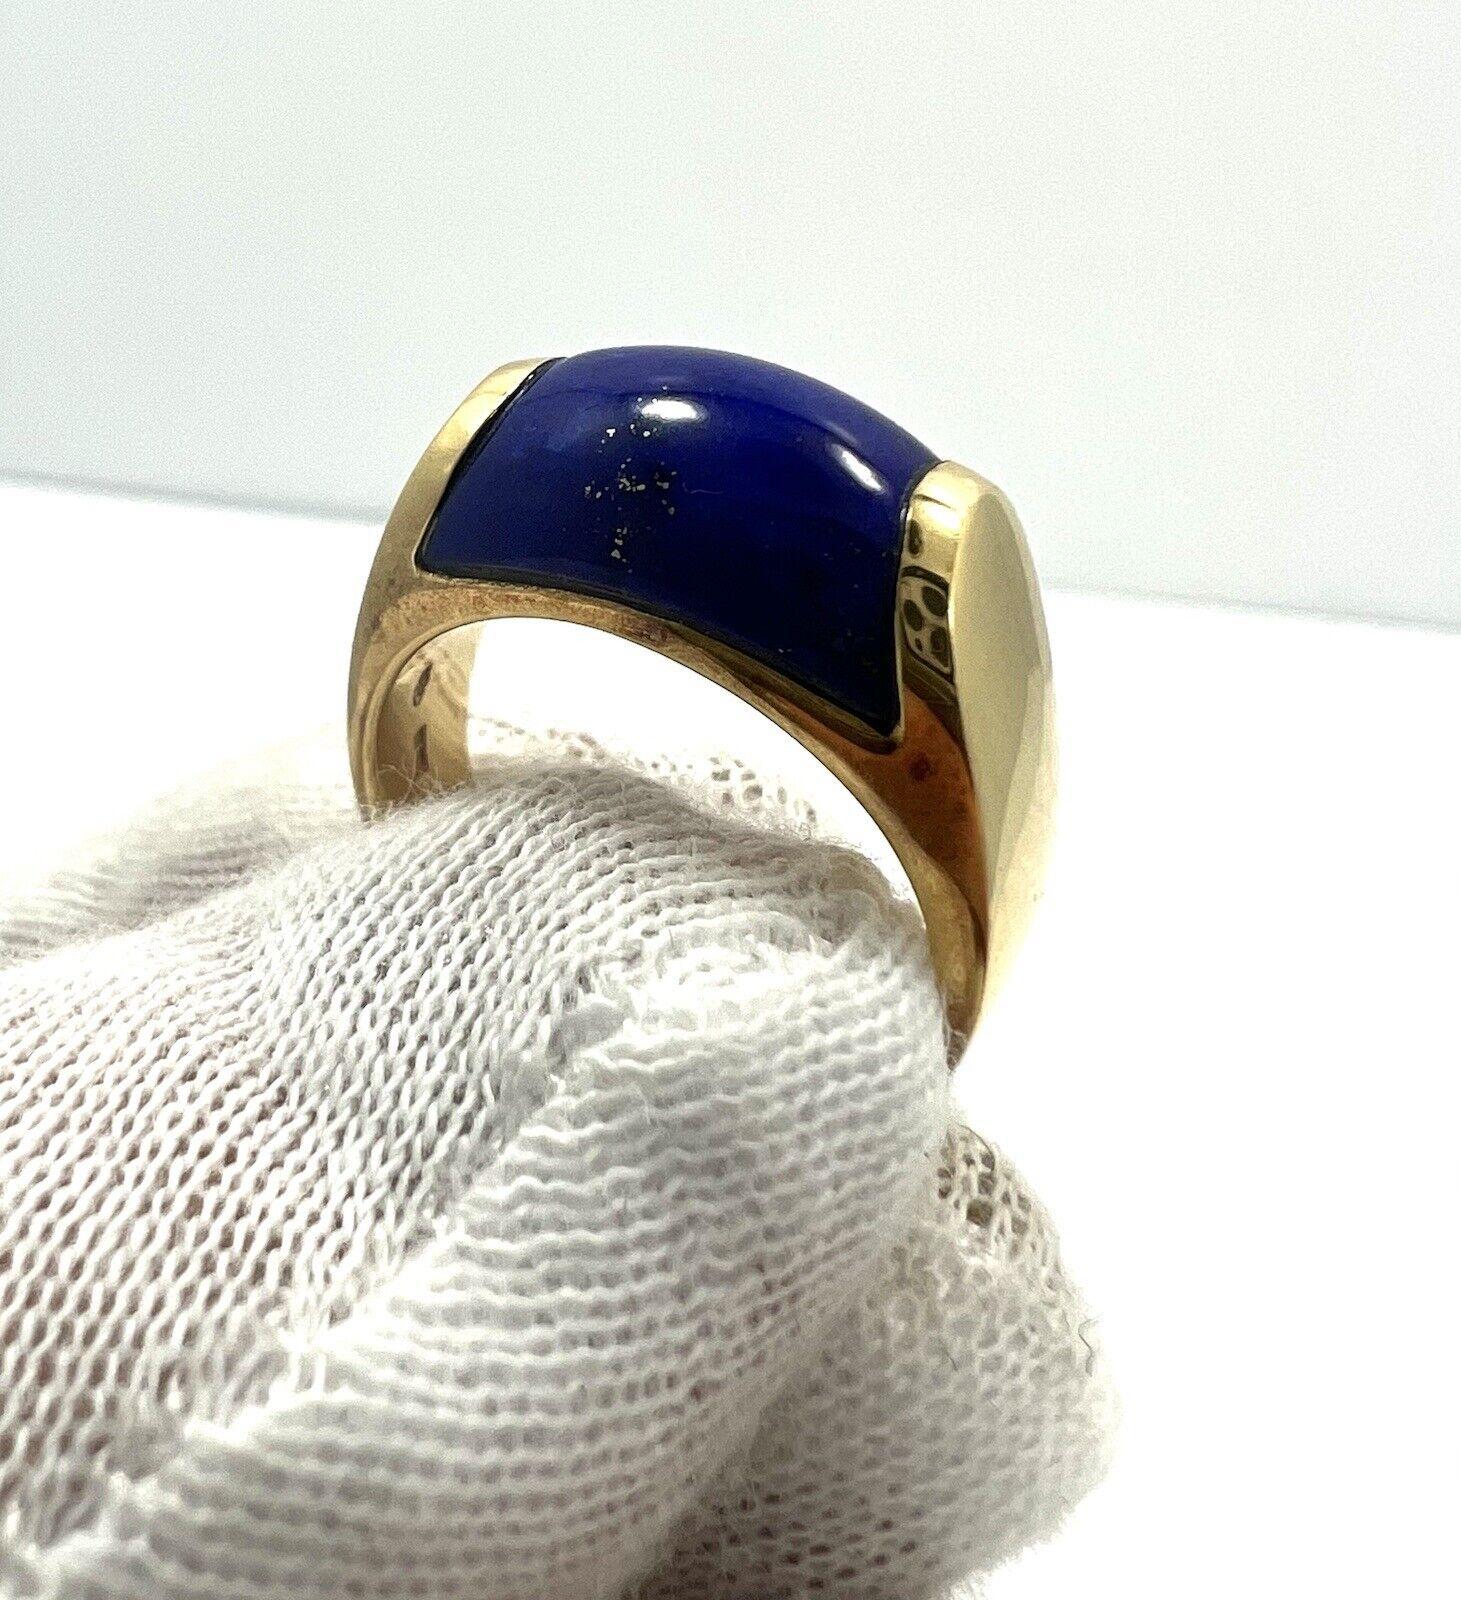 Bvlgari Italy 18k Yellow Gold & Lapis Tronchetto Collection Ring Vintage

Here is your chance to purchase a beautiful and highly collectible designer ring.     

The weight is 8.2 grams.  The ring size is 6.75.  The ring is in excellent condition.  